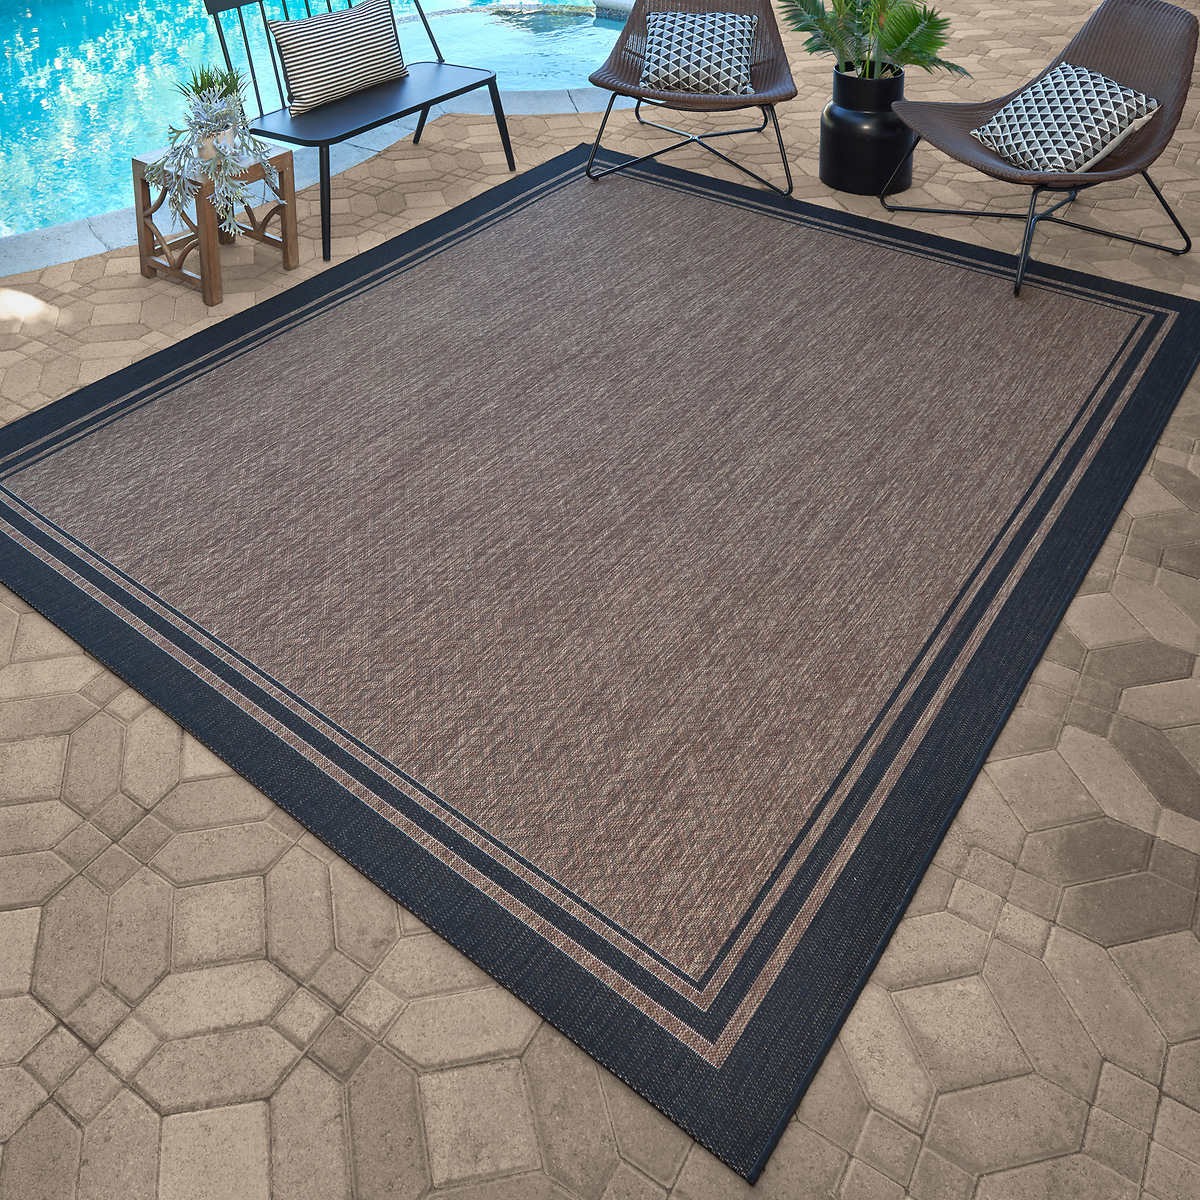 Naples Indoor Outdoor Area Rug Ace, Outdoor Patio Rugs And Pillows